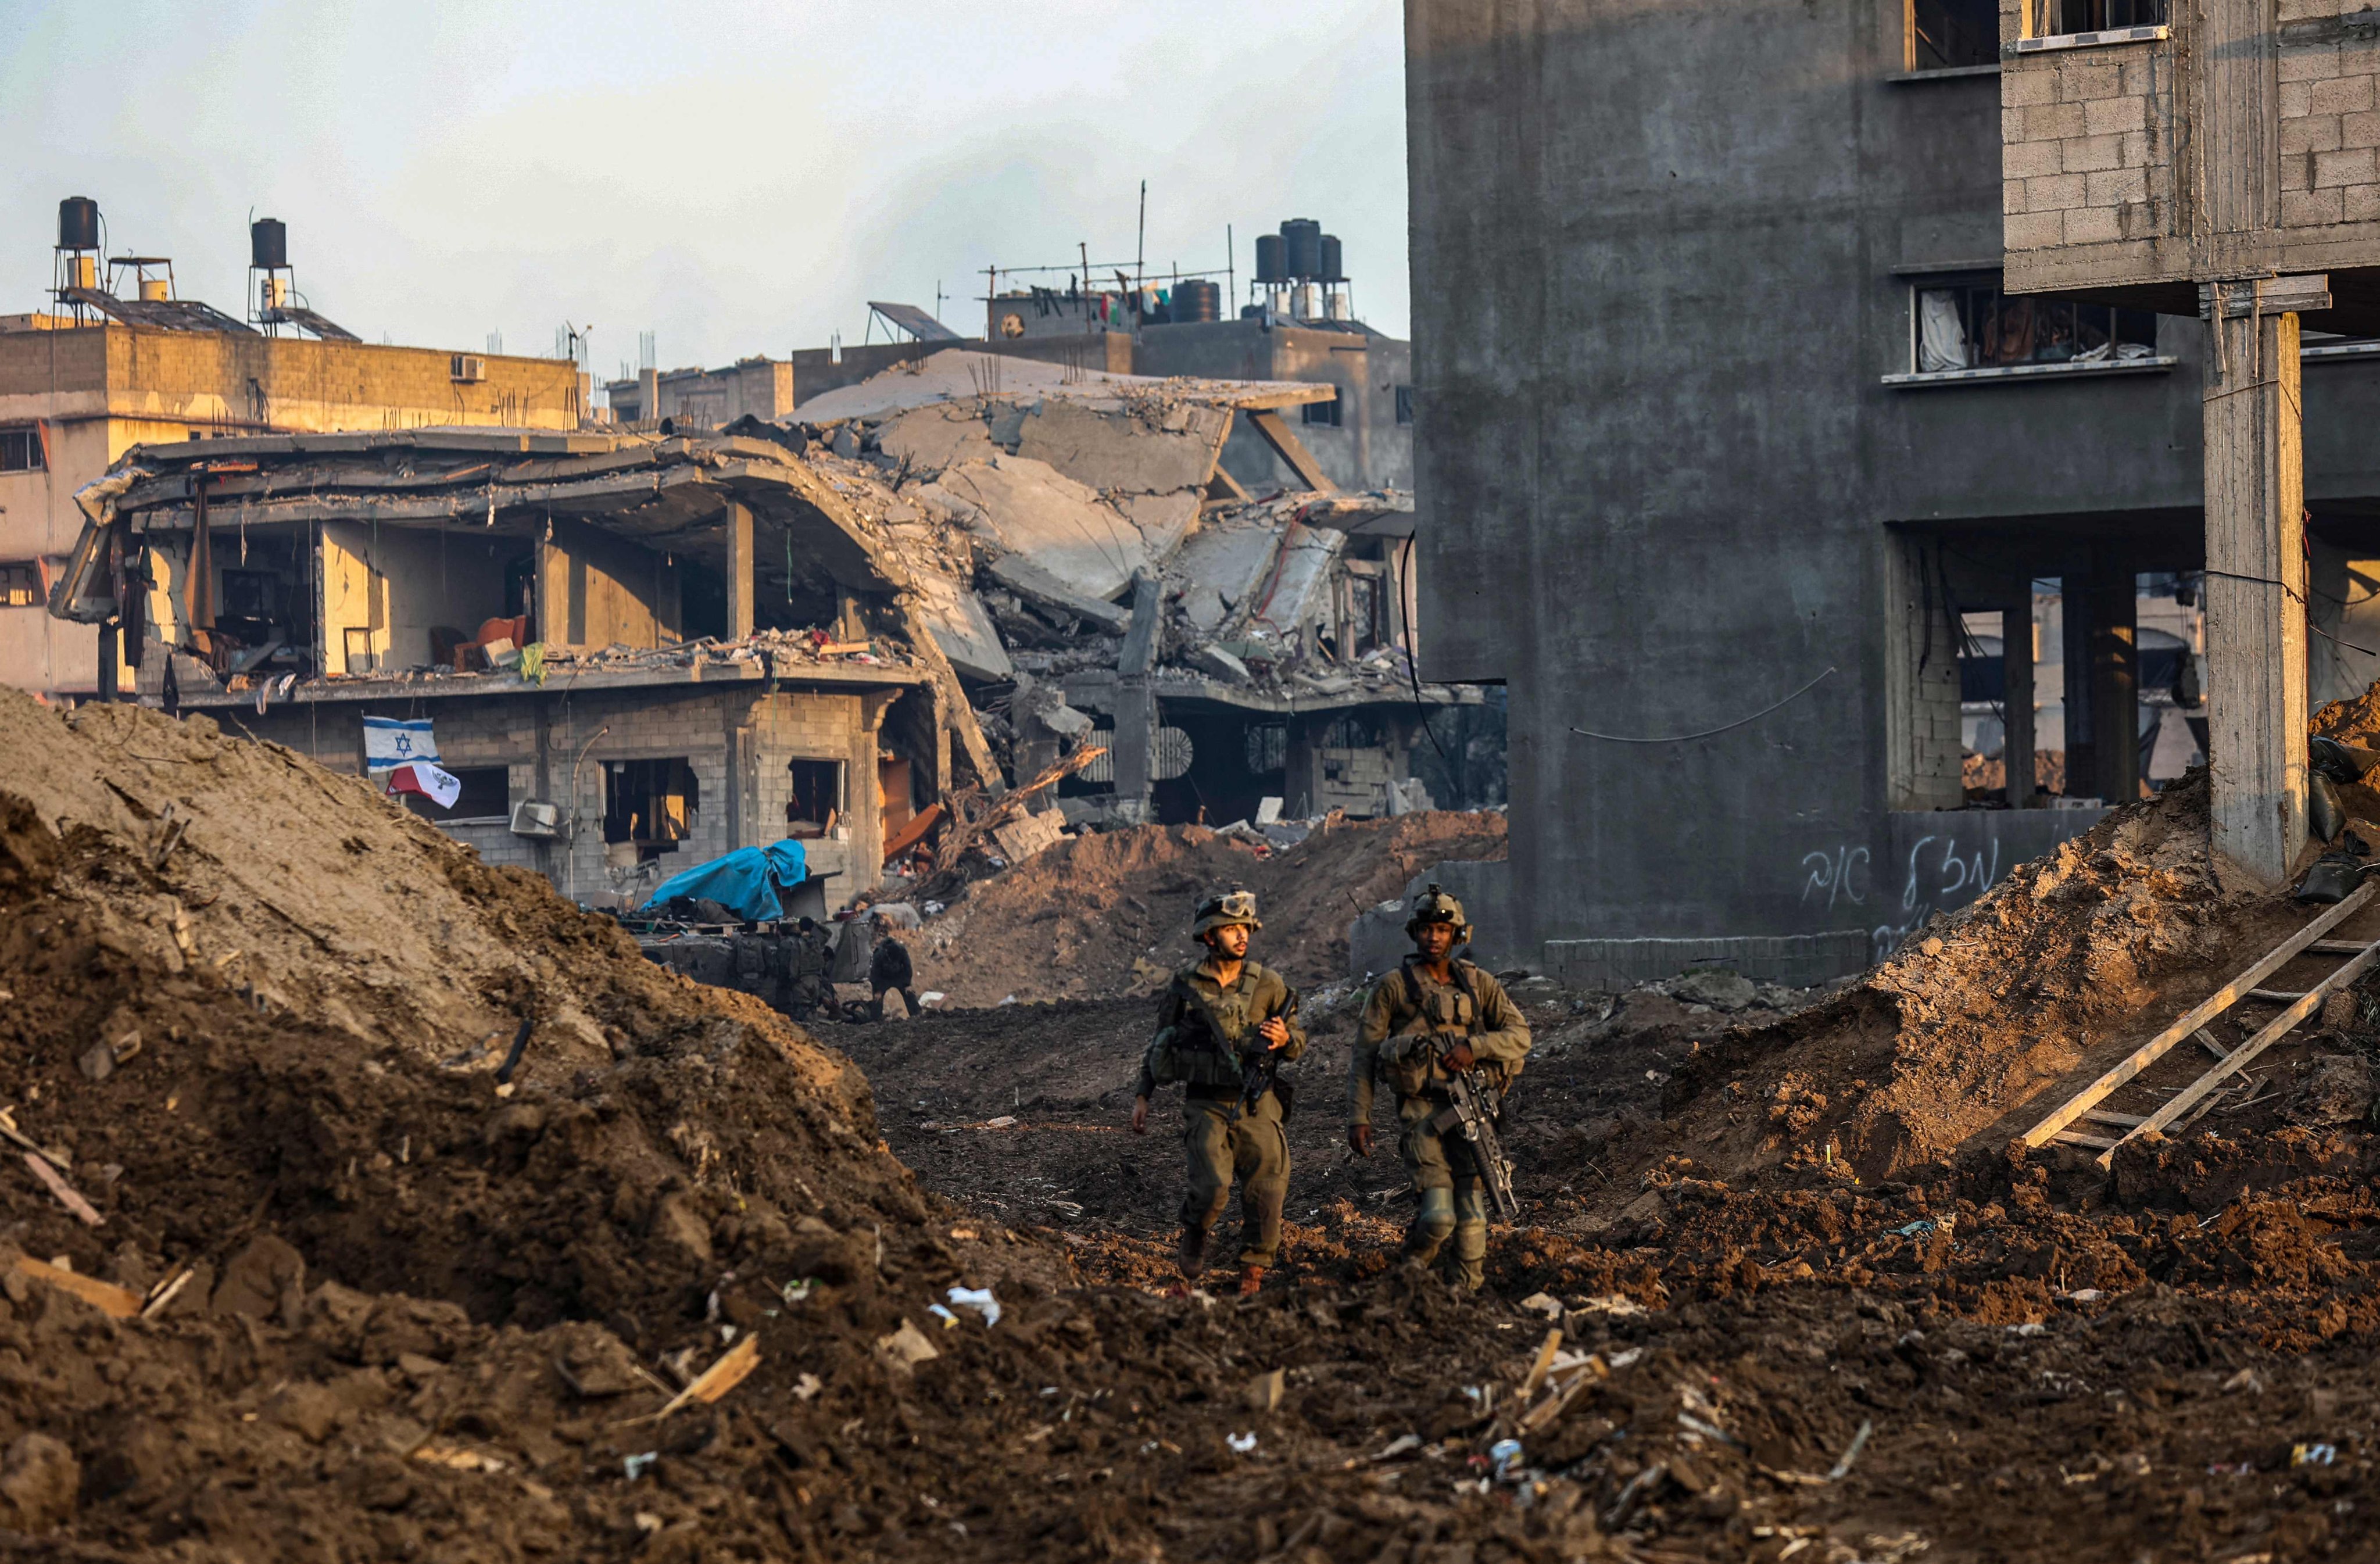 Israeli soldiers walk past damaged buildings during a military operation in the north of the Gaza Strip amid continuing battles between Israel and Hamas on December 19. This photo was taken during a controlled tour and subsequently edited under the supervision of the Israeli military. Photo: AFP